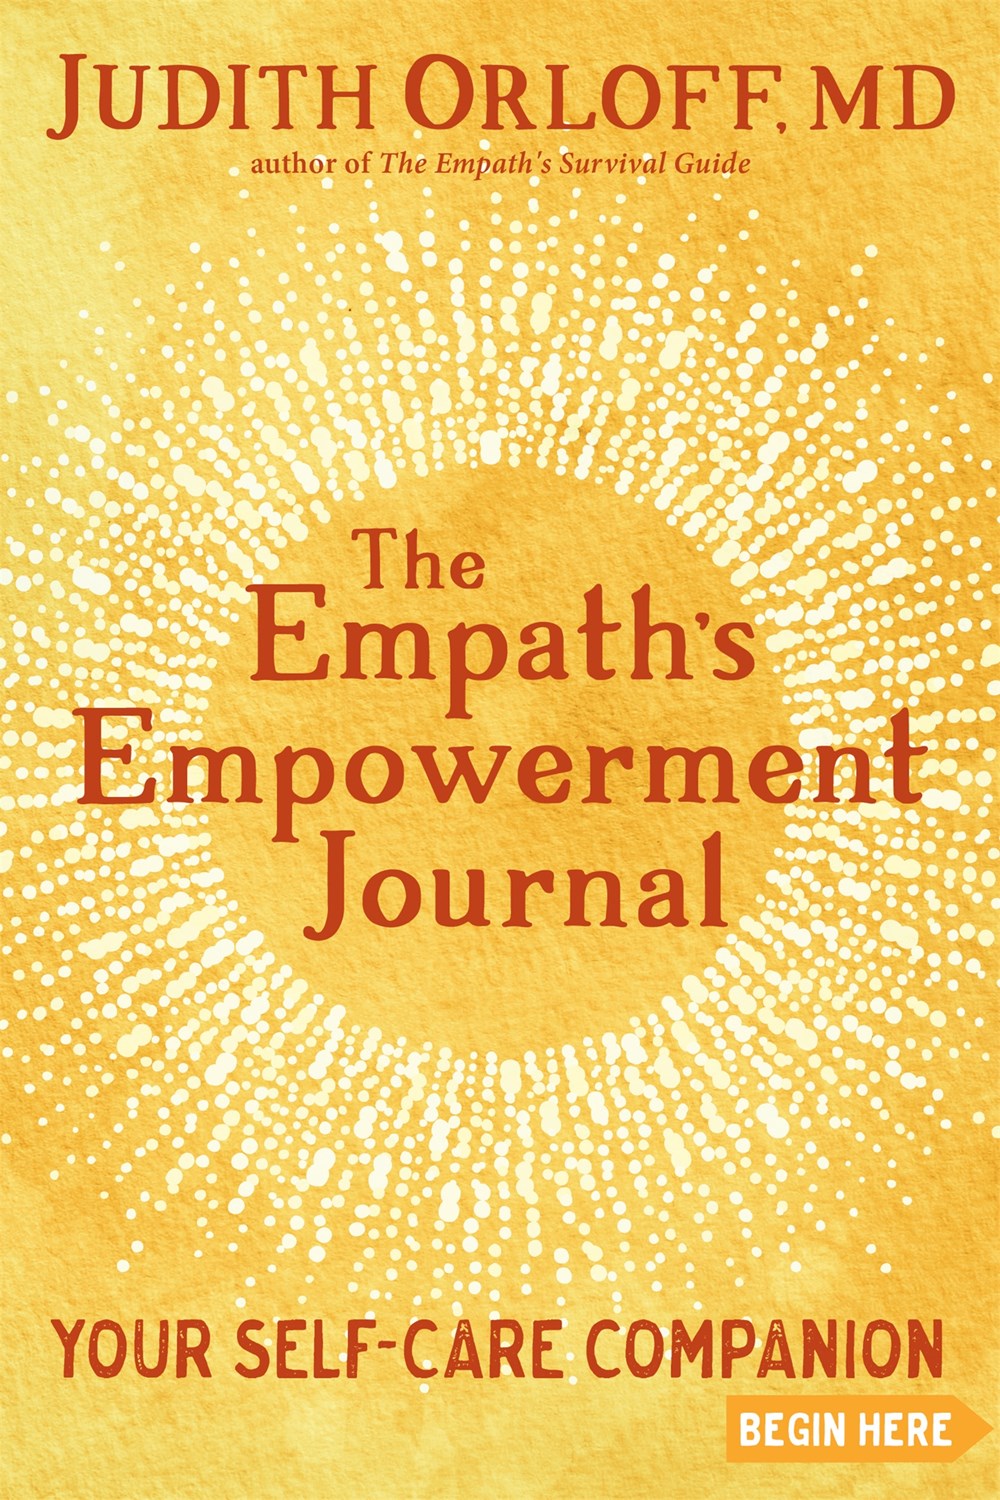 The Empath’s Empowerment Journal: Your Self-Care Companion